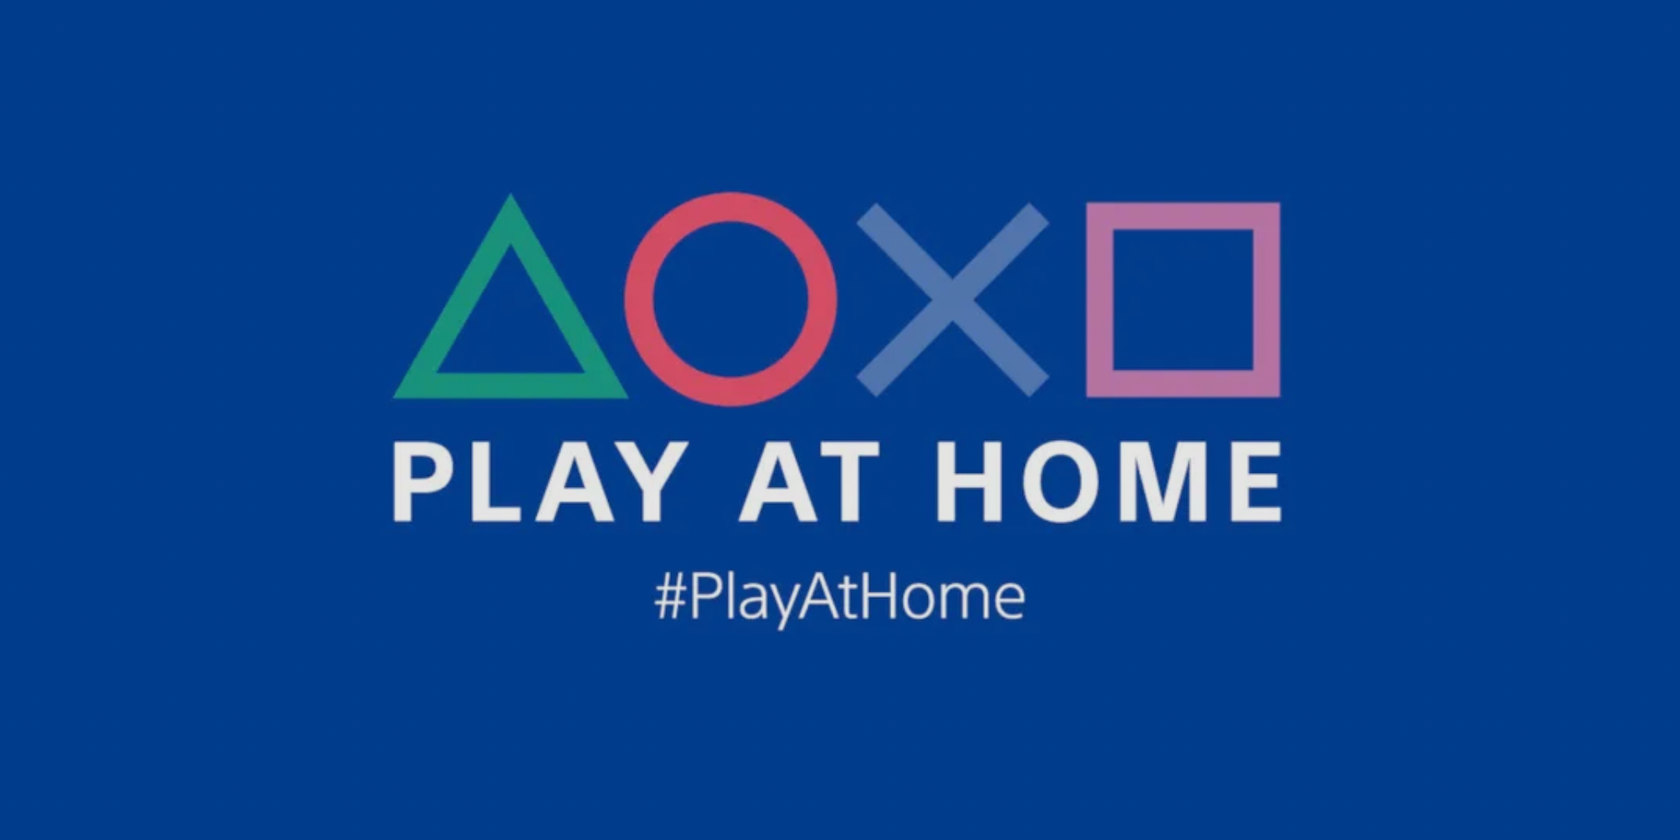 The Sony "Play At Home" text with #PlayAtHome with the Sony button logos on a blue background.